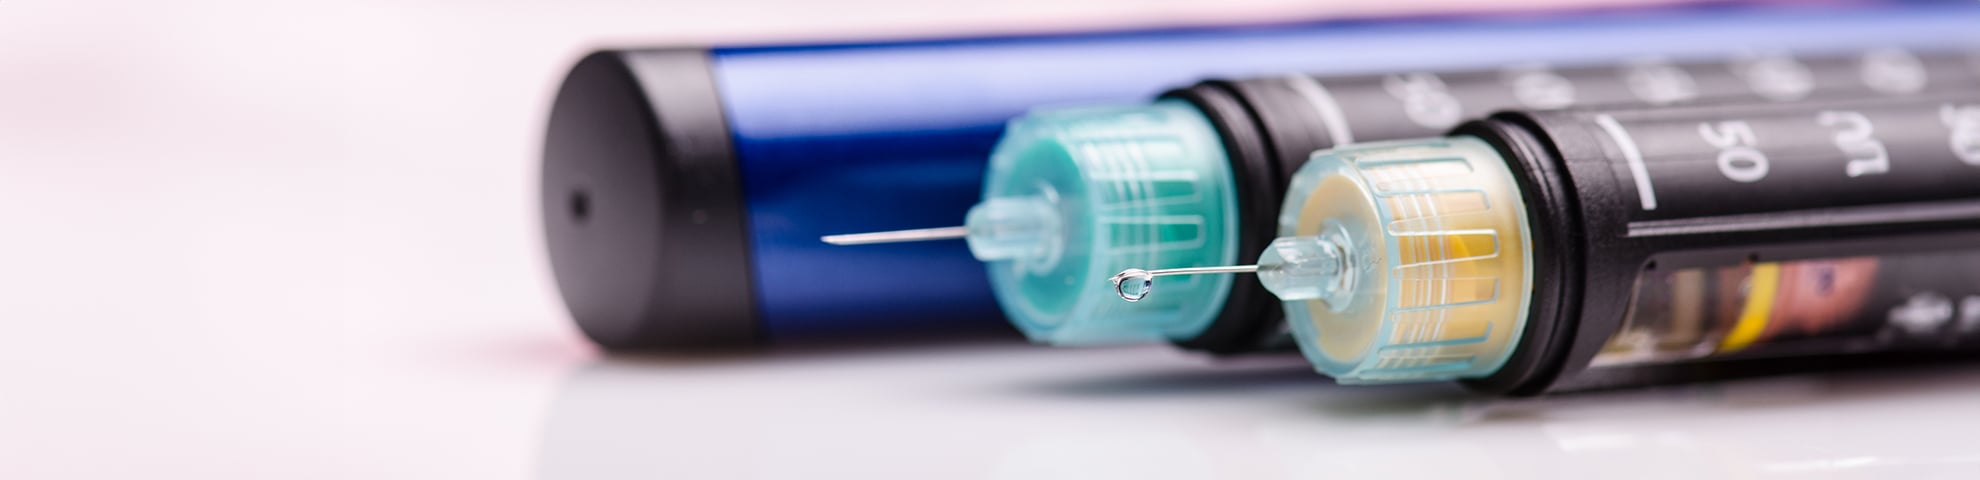 For diabetes patients, needle-free insulin injections are on the way